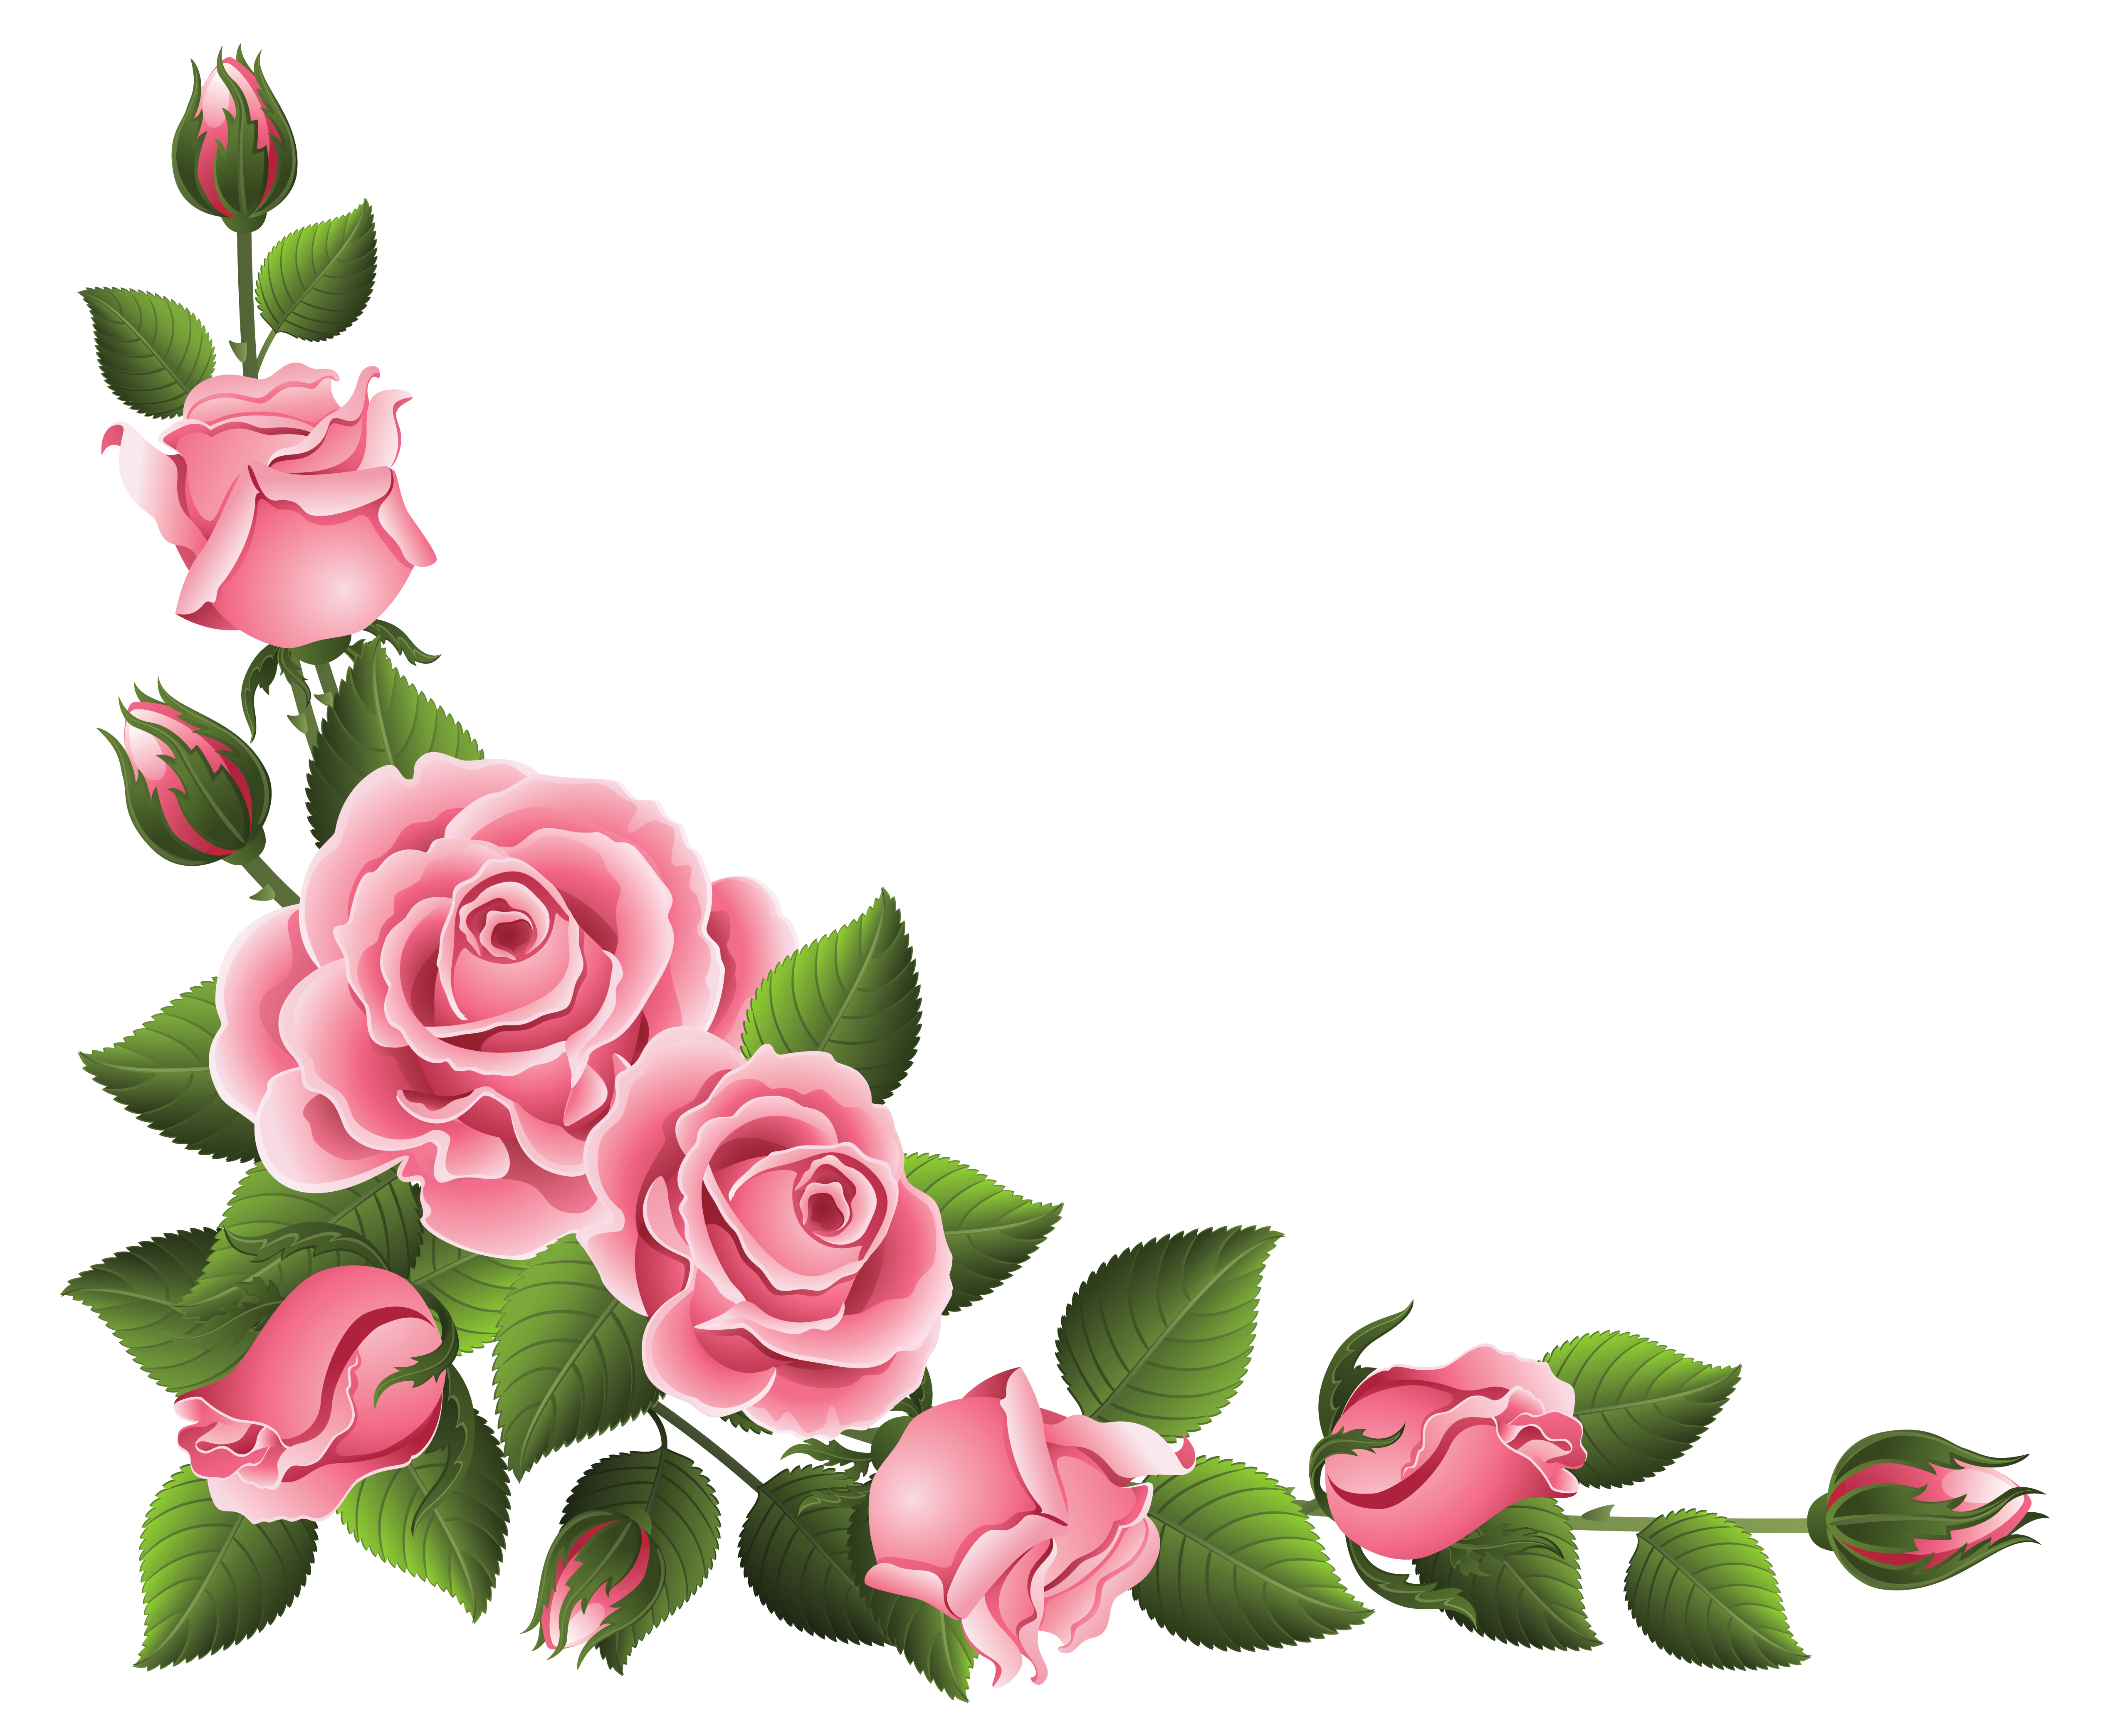 Decoration with roses png. Invitation clipart corner